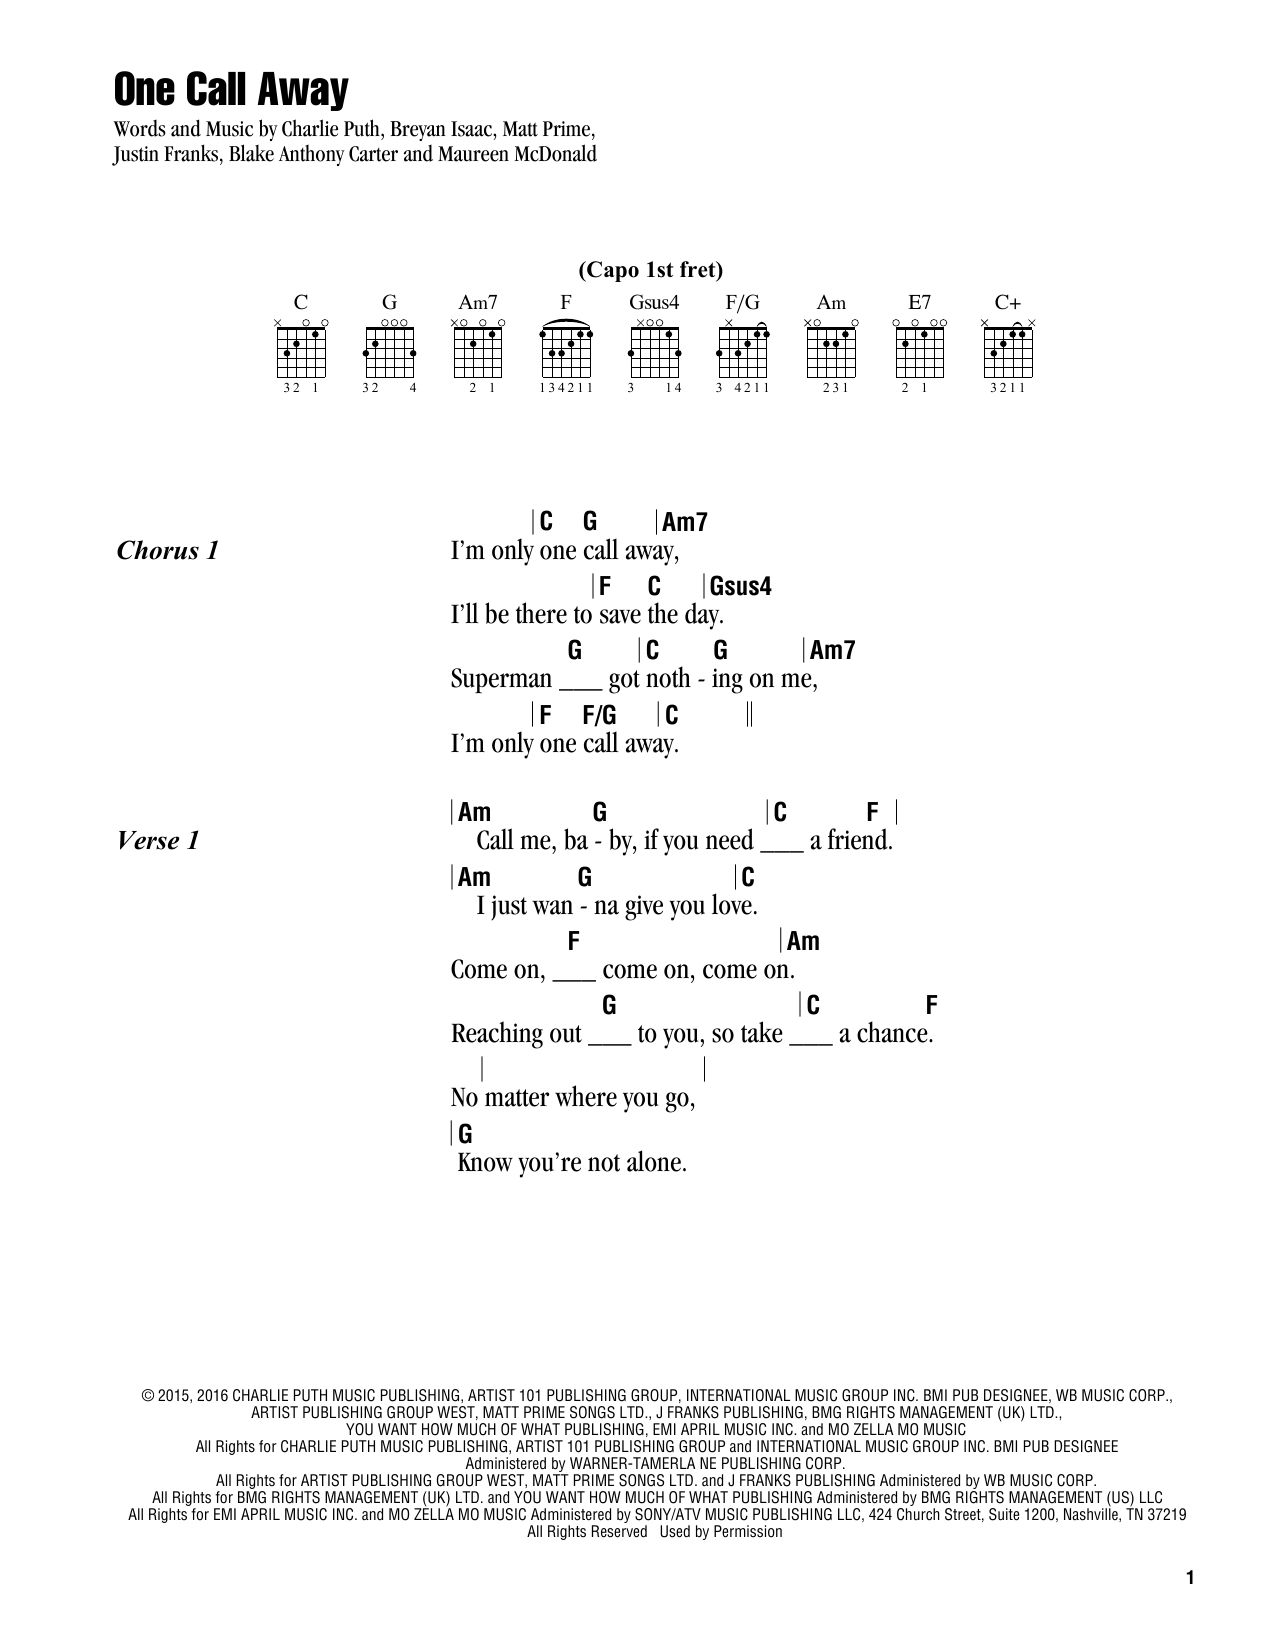 Download Charlie Puth One Call Away Sheet Music